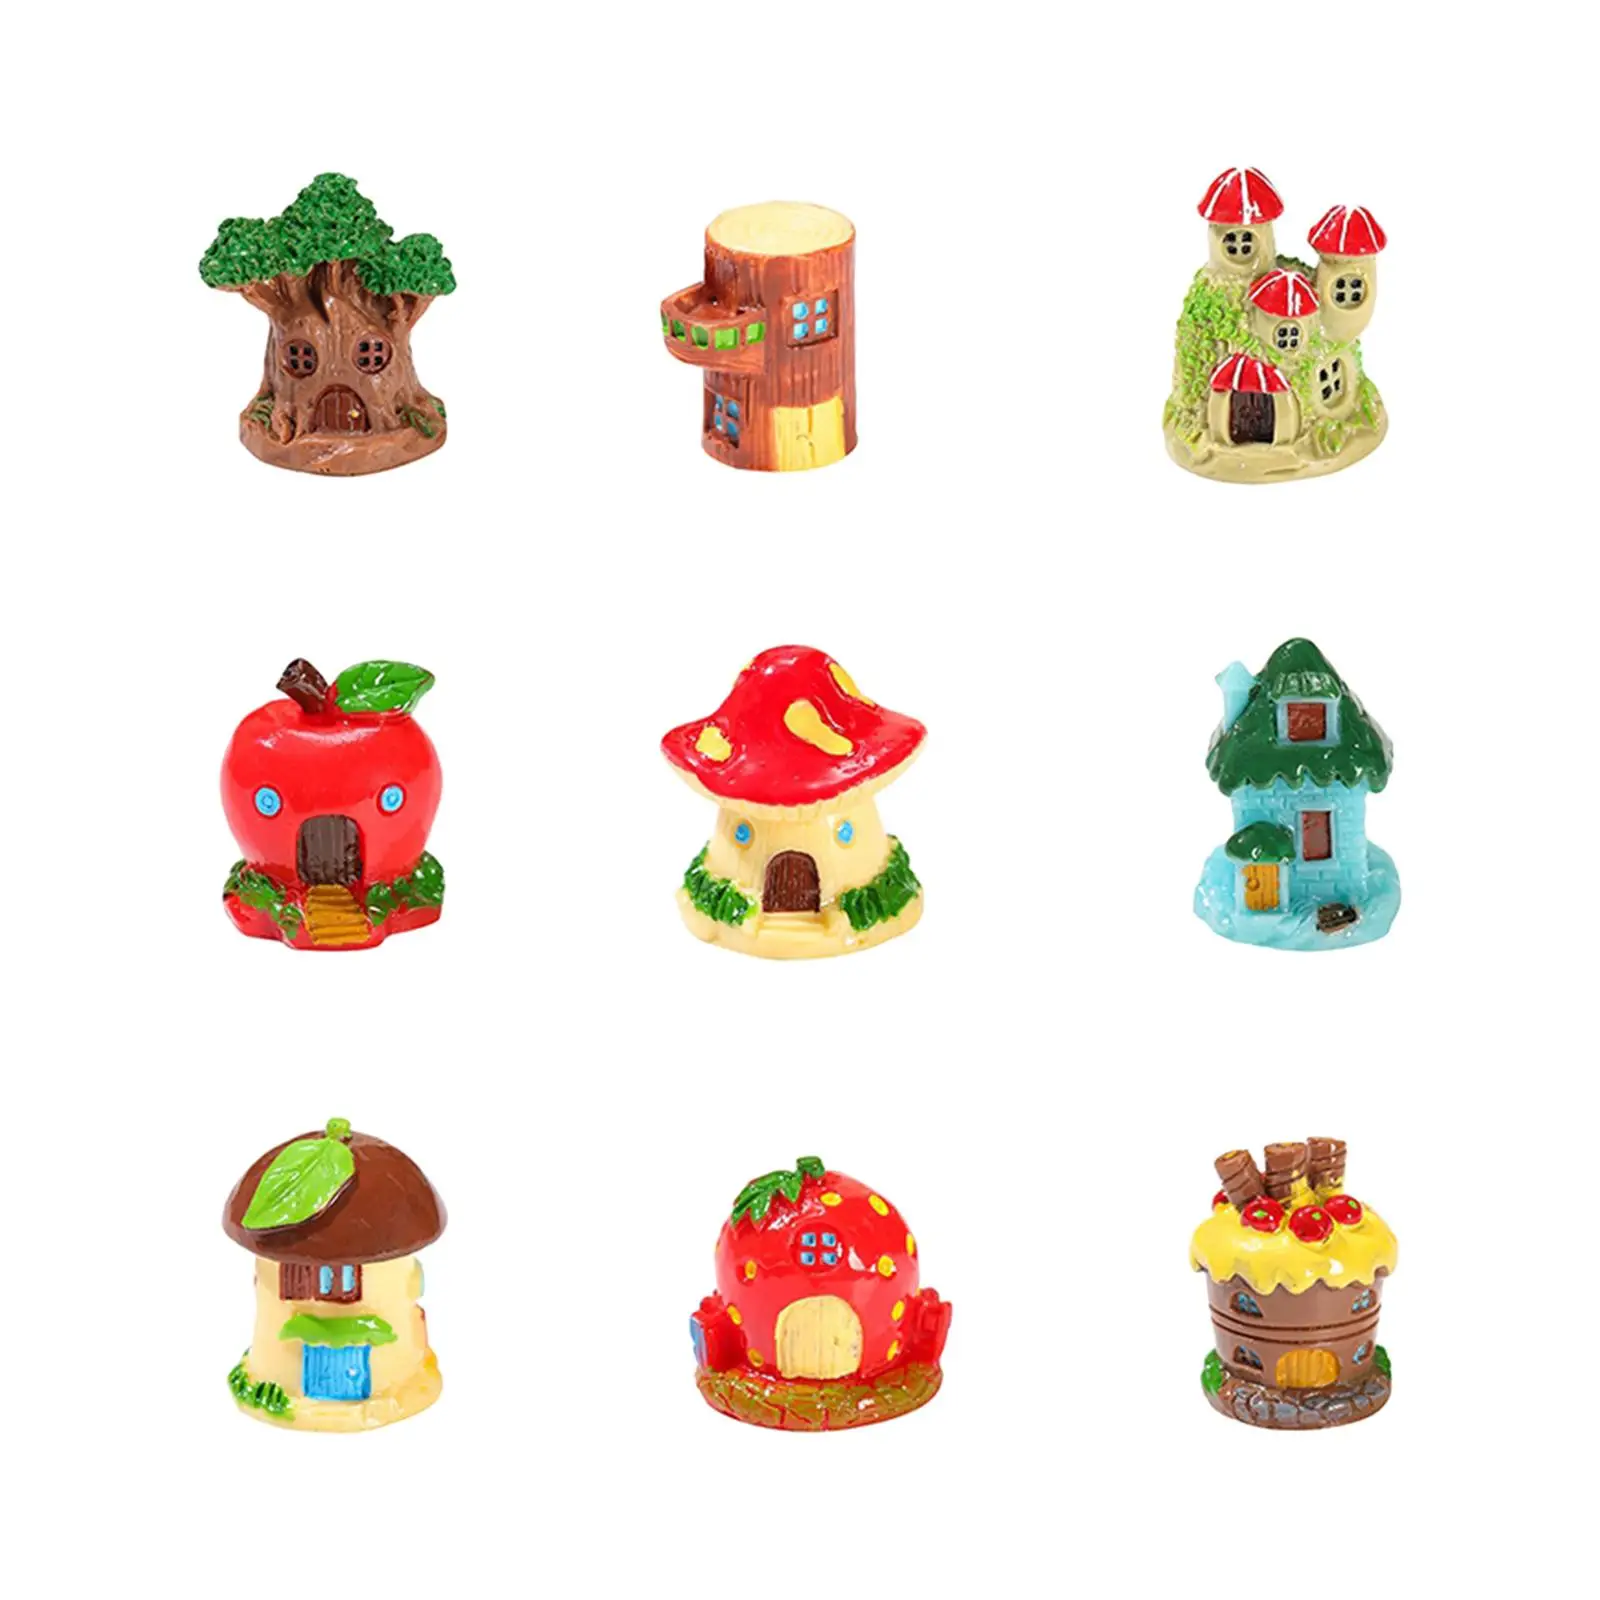 9x Tree House Micro Landscape Decorations Collectible Cognition Toy Statues for